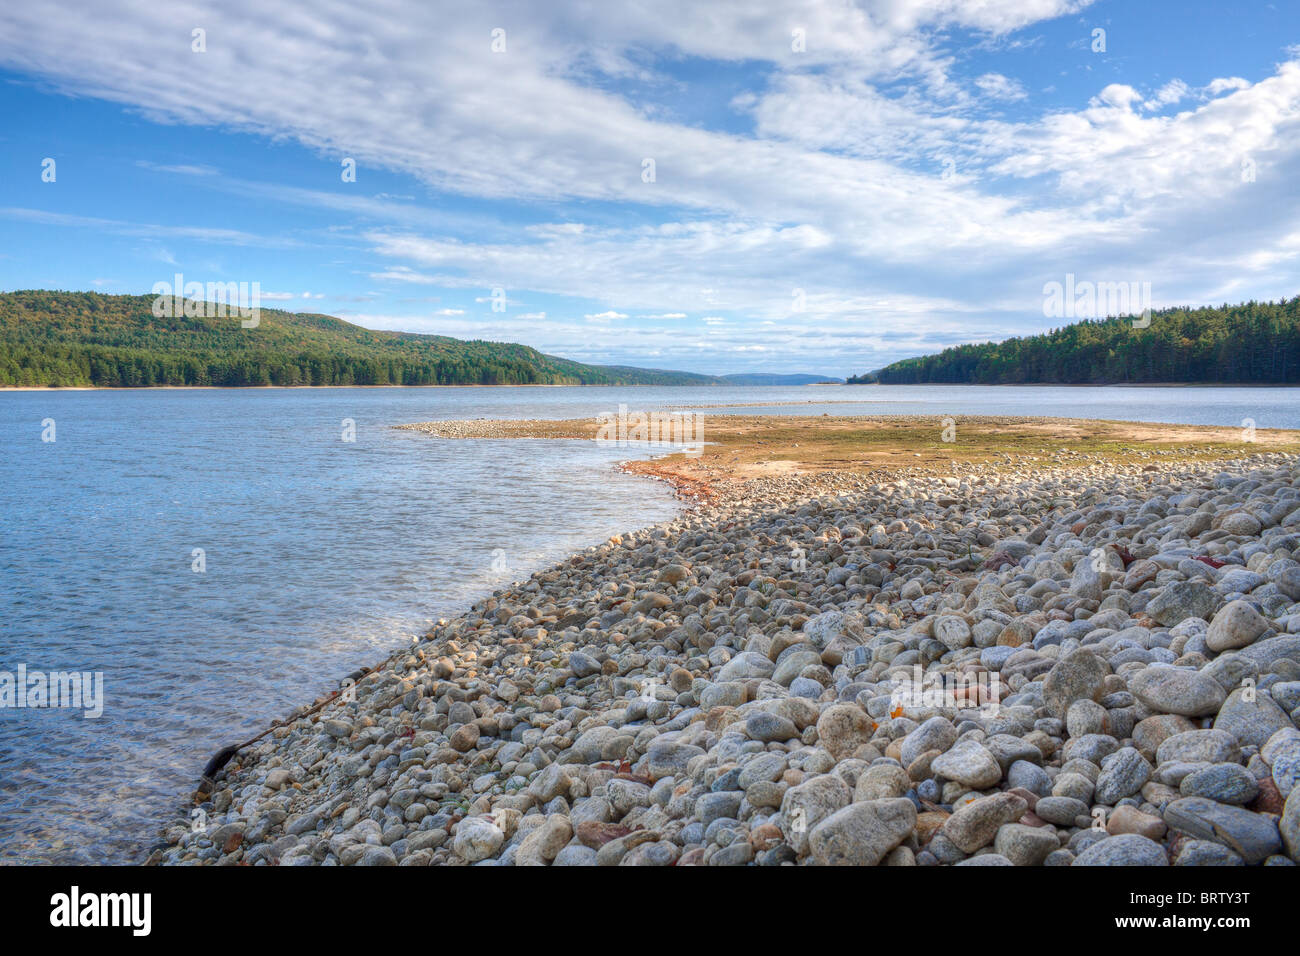 rocky beach at reservoir with beautiful view Stock Photo